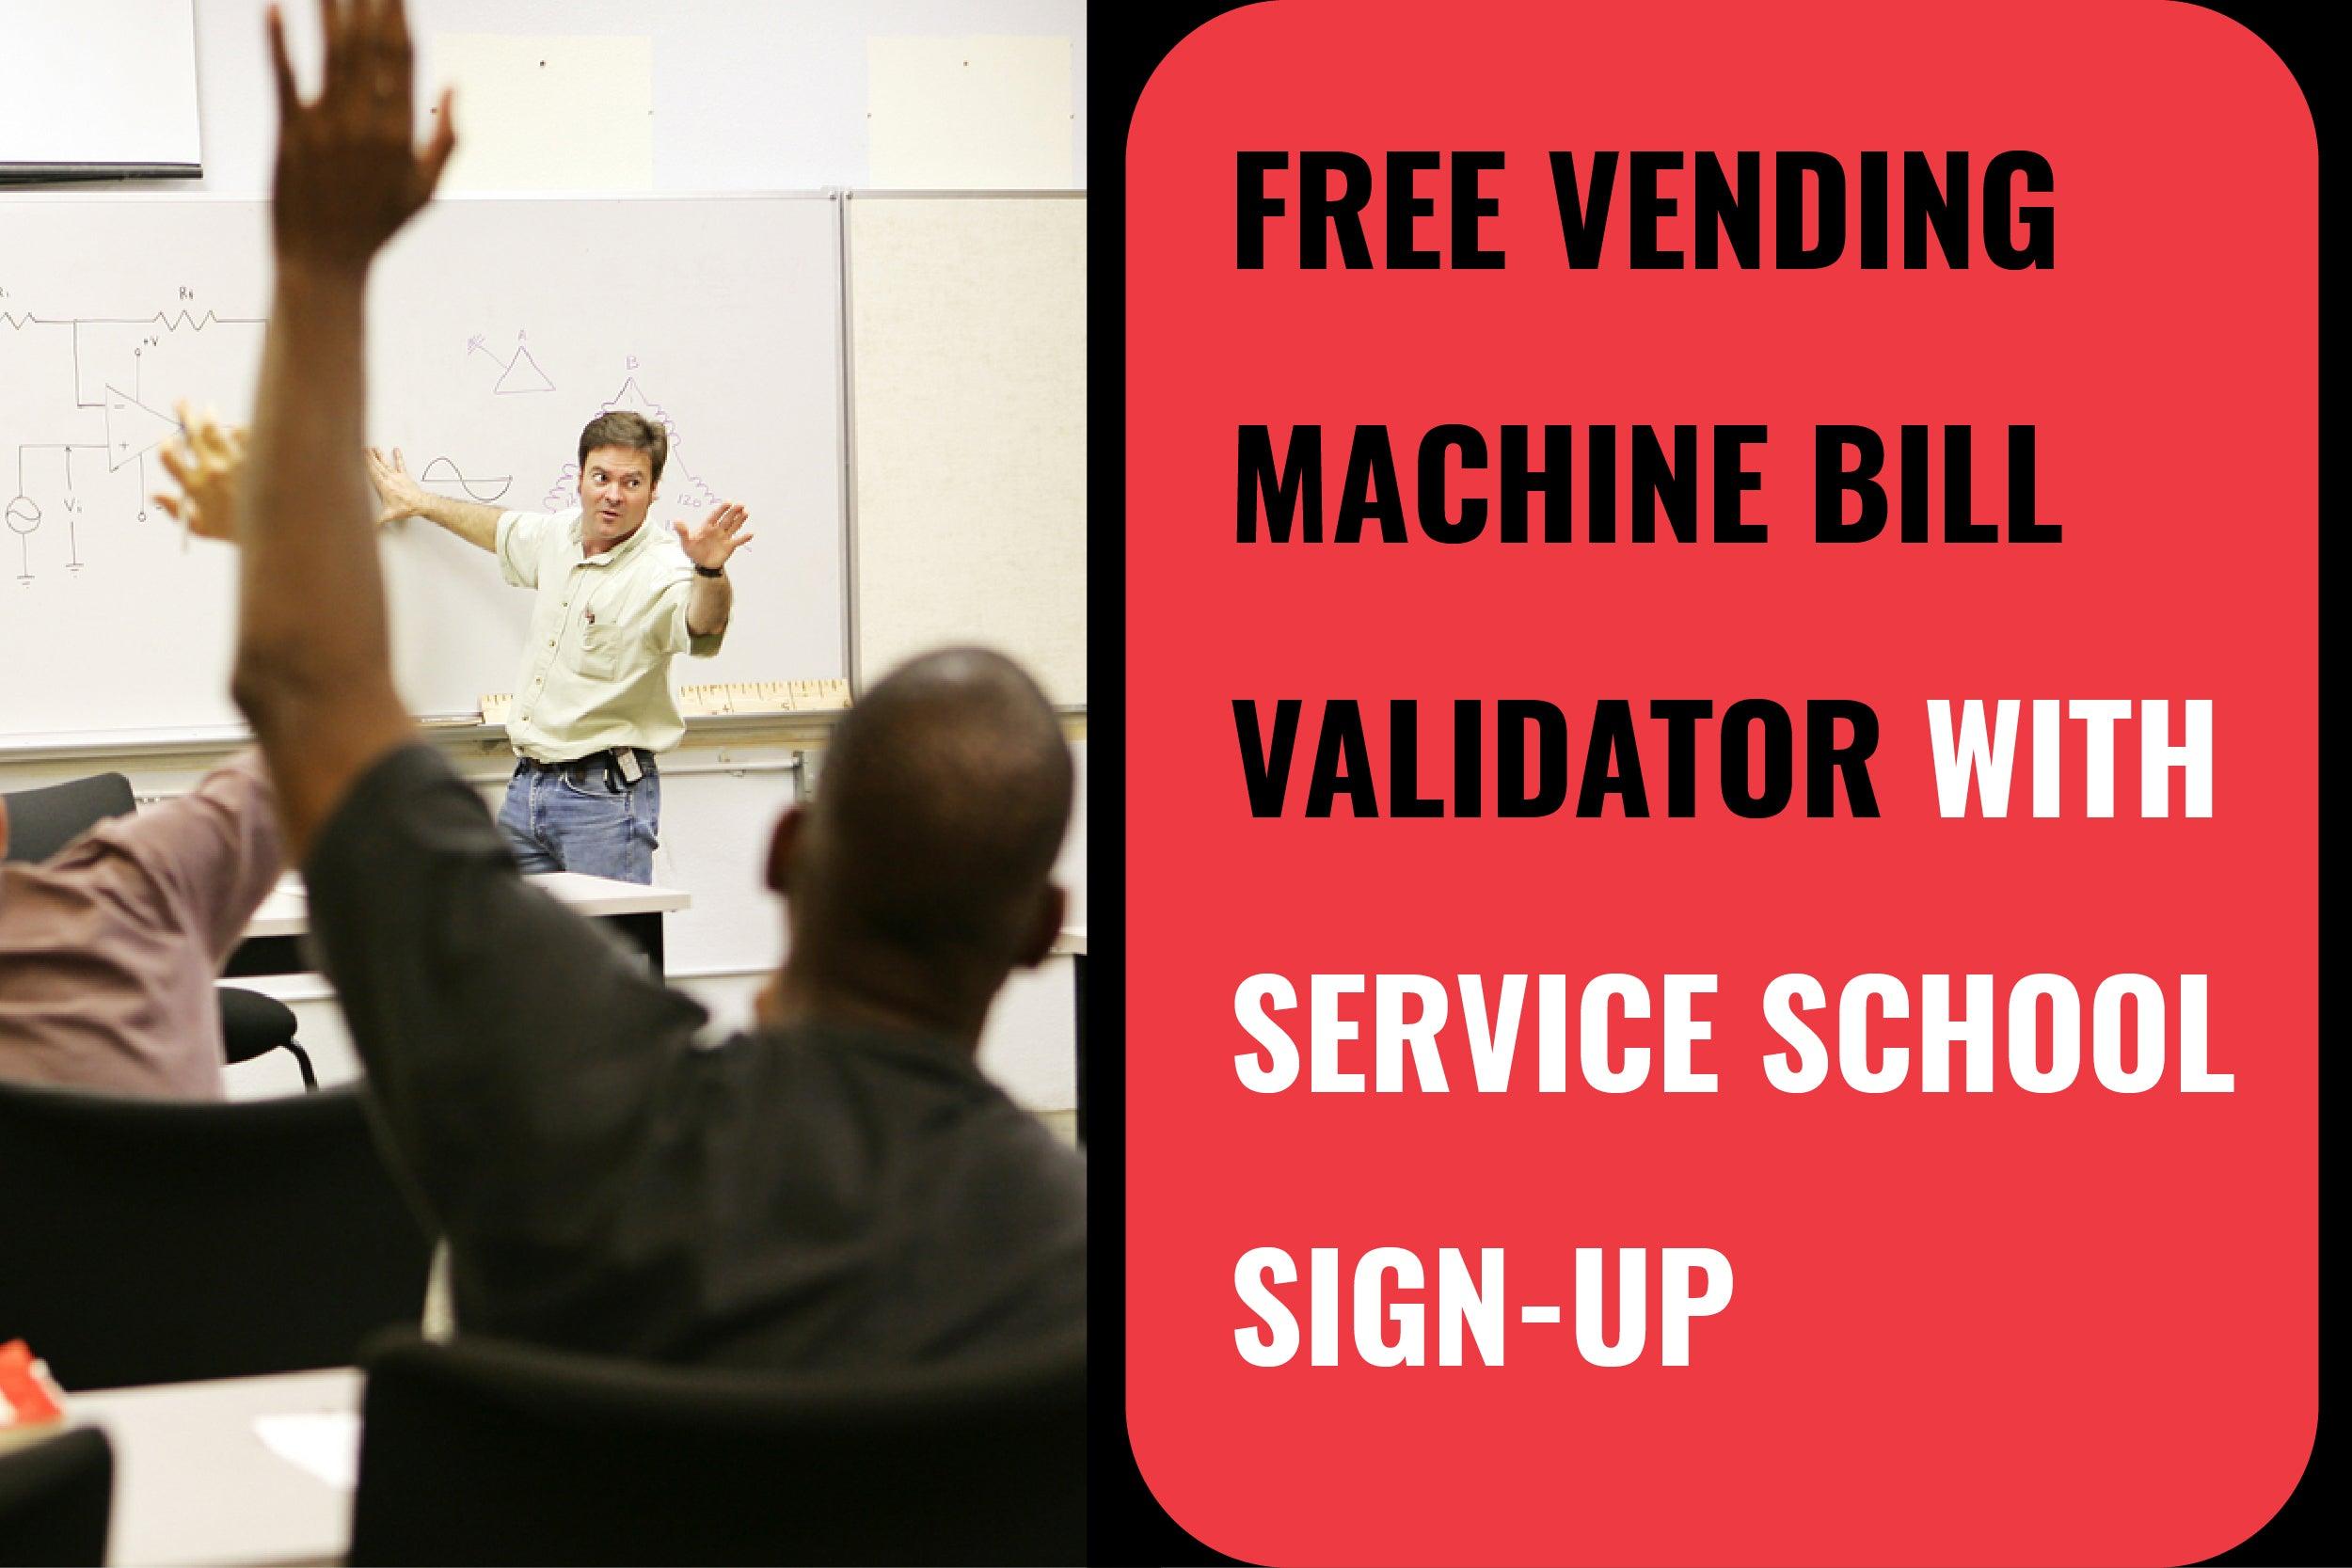 Payment System: Free Vending Machine Bill Validator with Service School Sign-Up - Vendnet